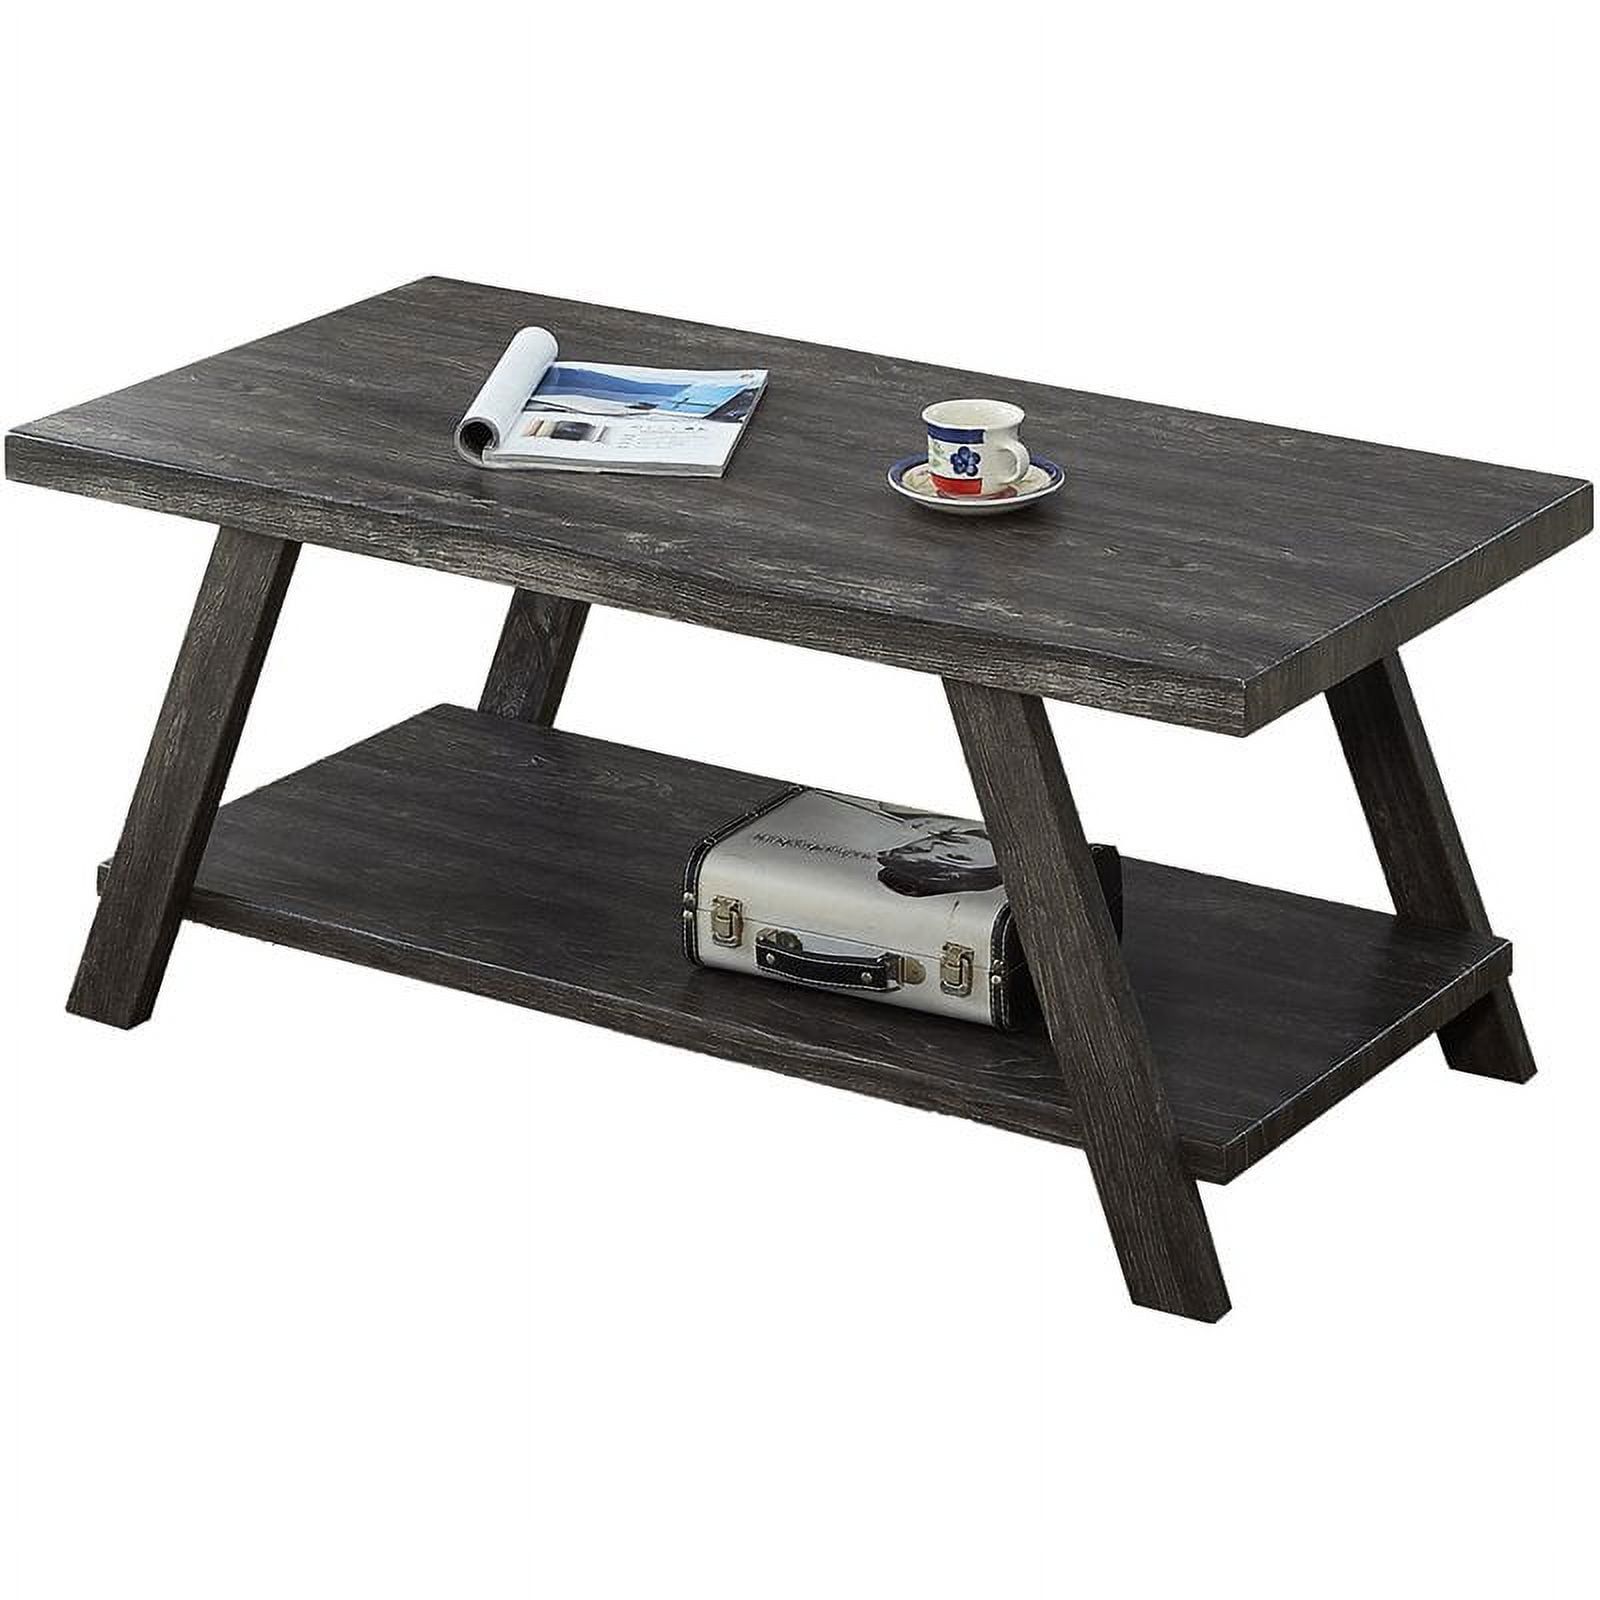 Pemberly Row Replicated Wood Coffee Table In Charcoal Finish – Walmart Throughout Pemberly Row Replicated Wood Coffee Tables (Photo 1 of 11)